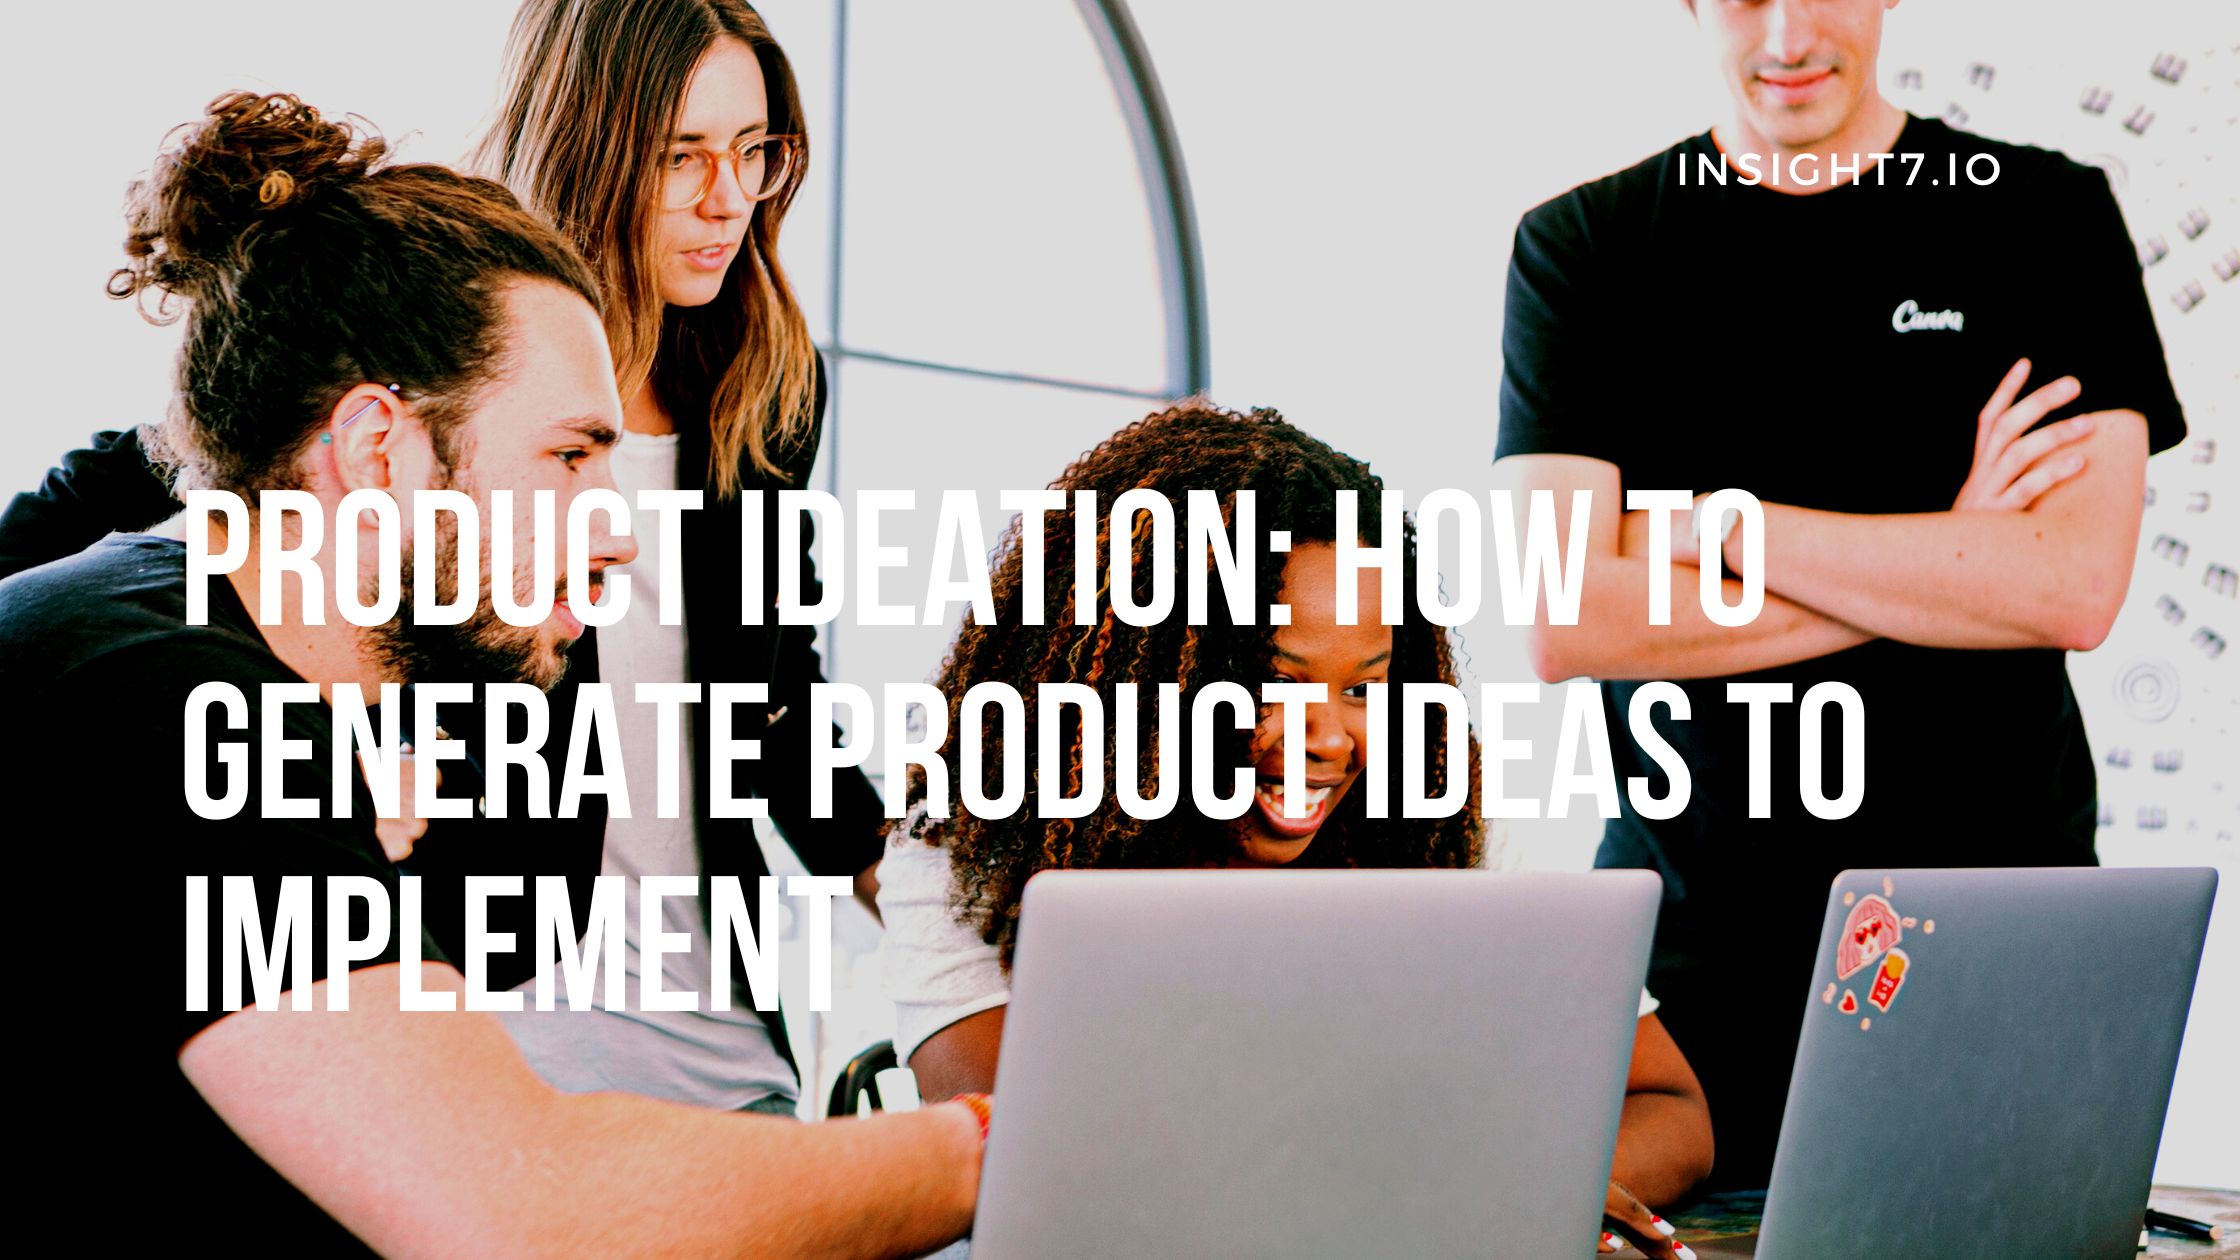 Product Ideation: How To Generate Product Ideas To Implement